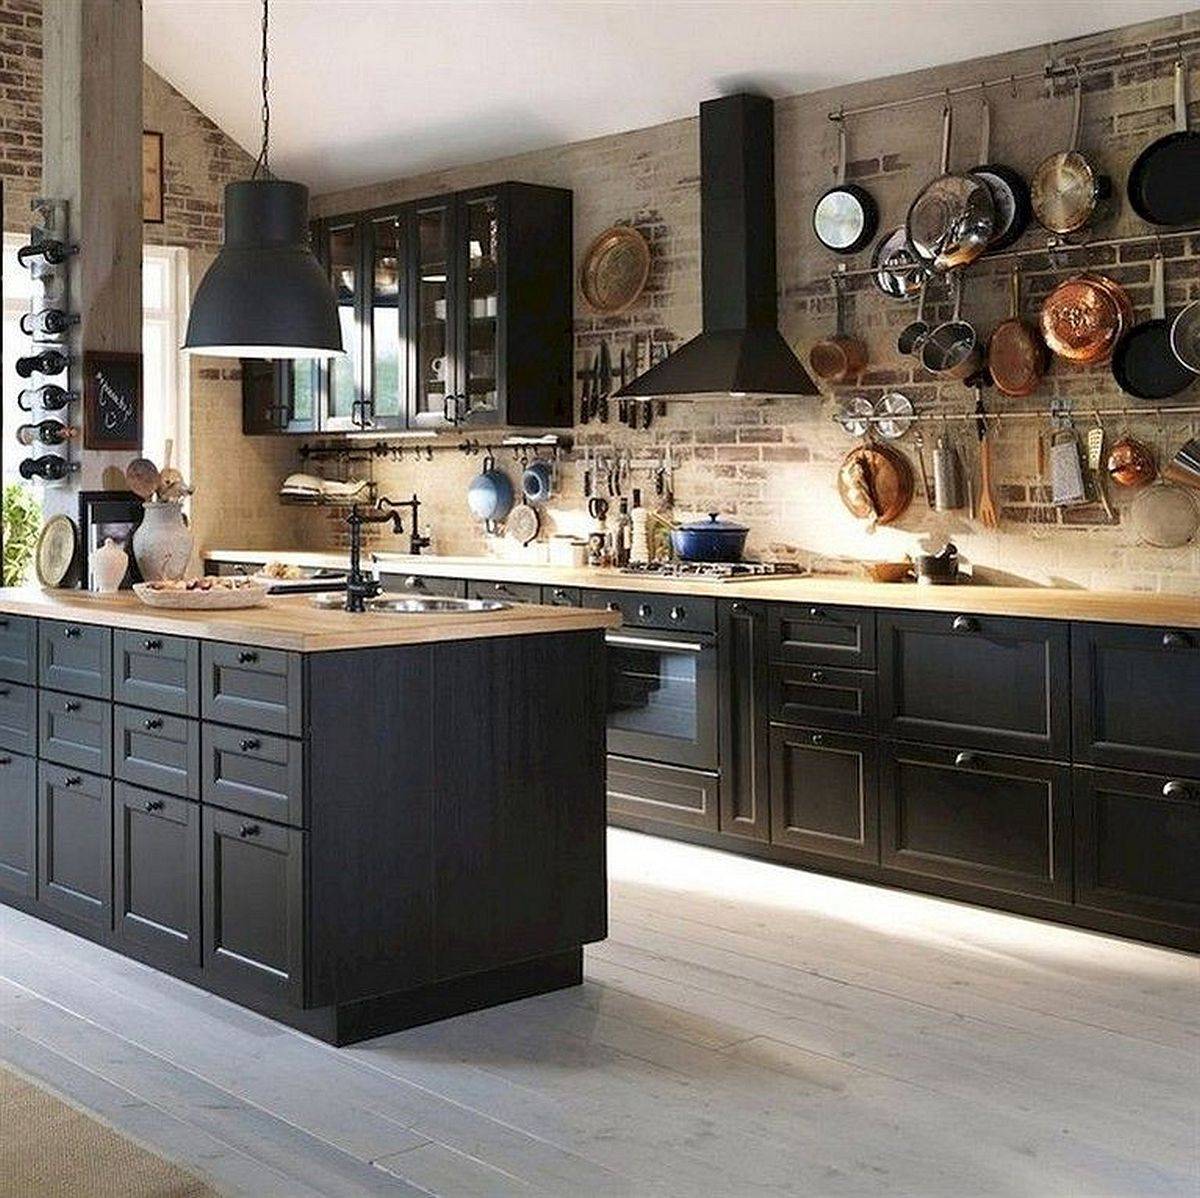 Timeless kitchen with brick walls and black wood cabinets along with wooden countertops